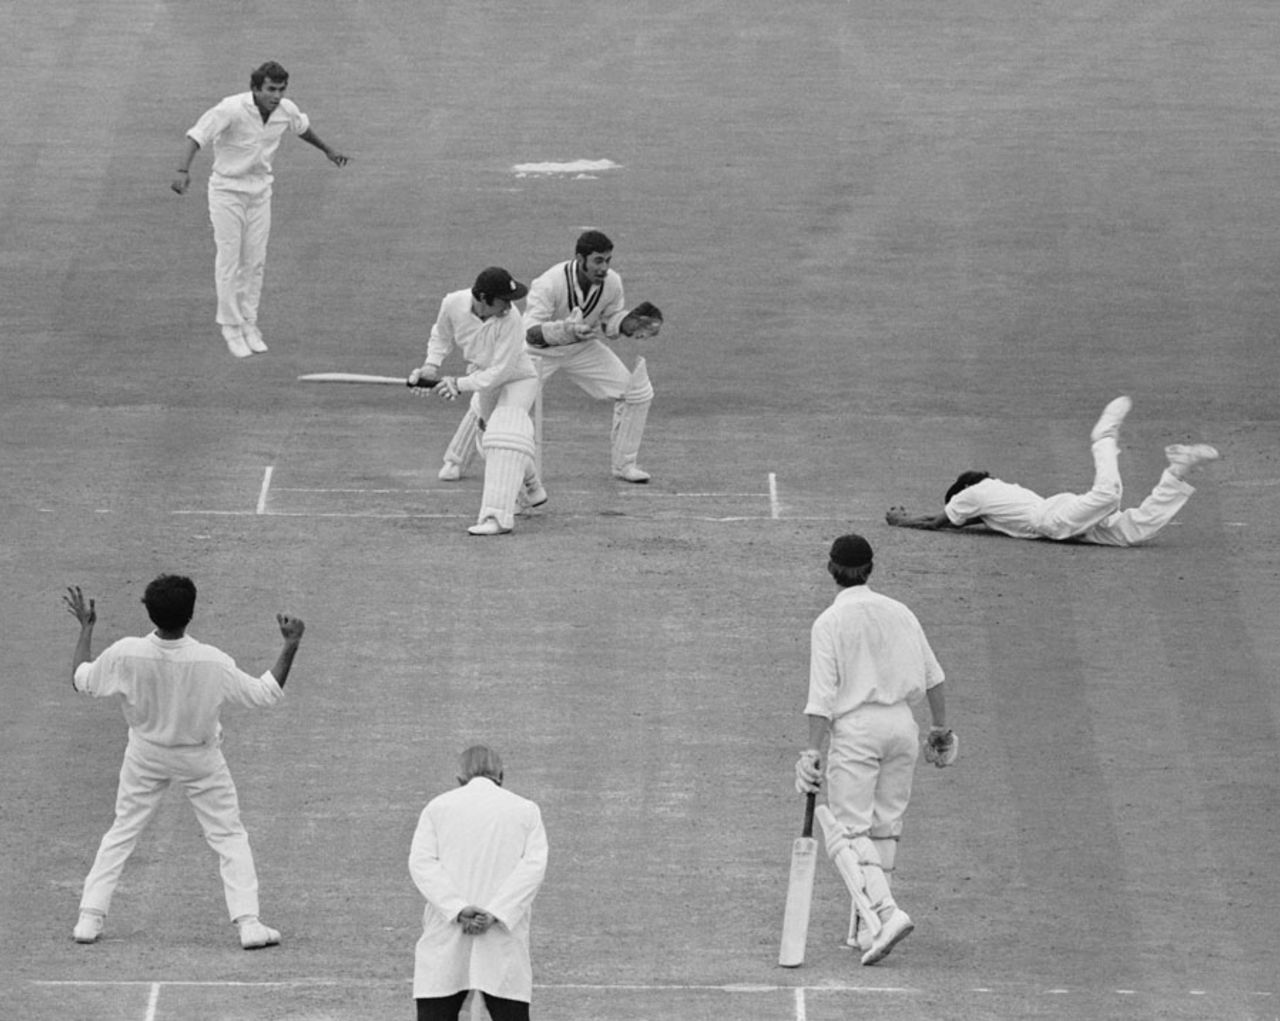 Eknath Solkar takes a brilliant catch to dismiss Alan Knott, England v India, The Oval, 5th day, August 24, 1971